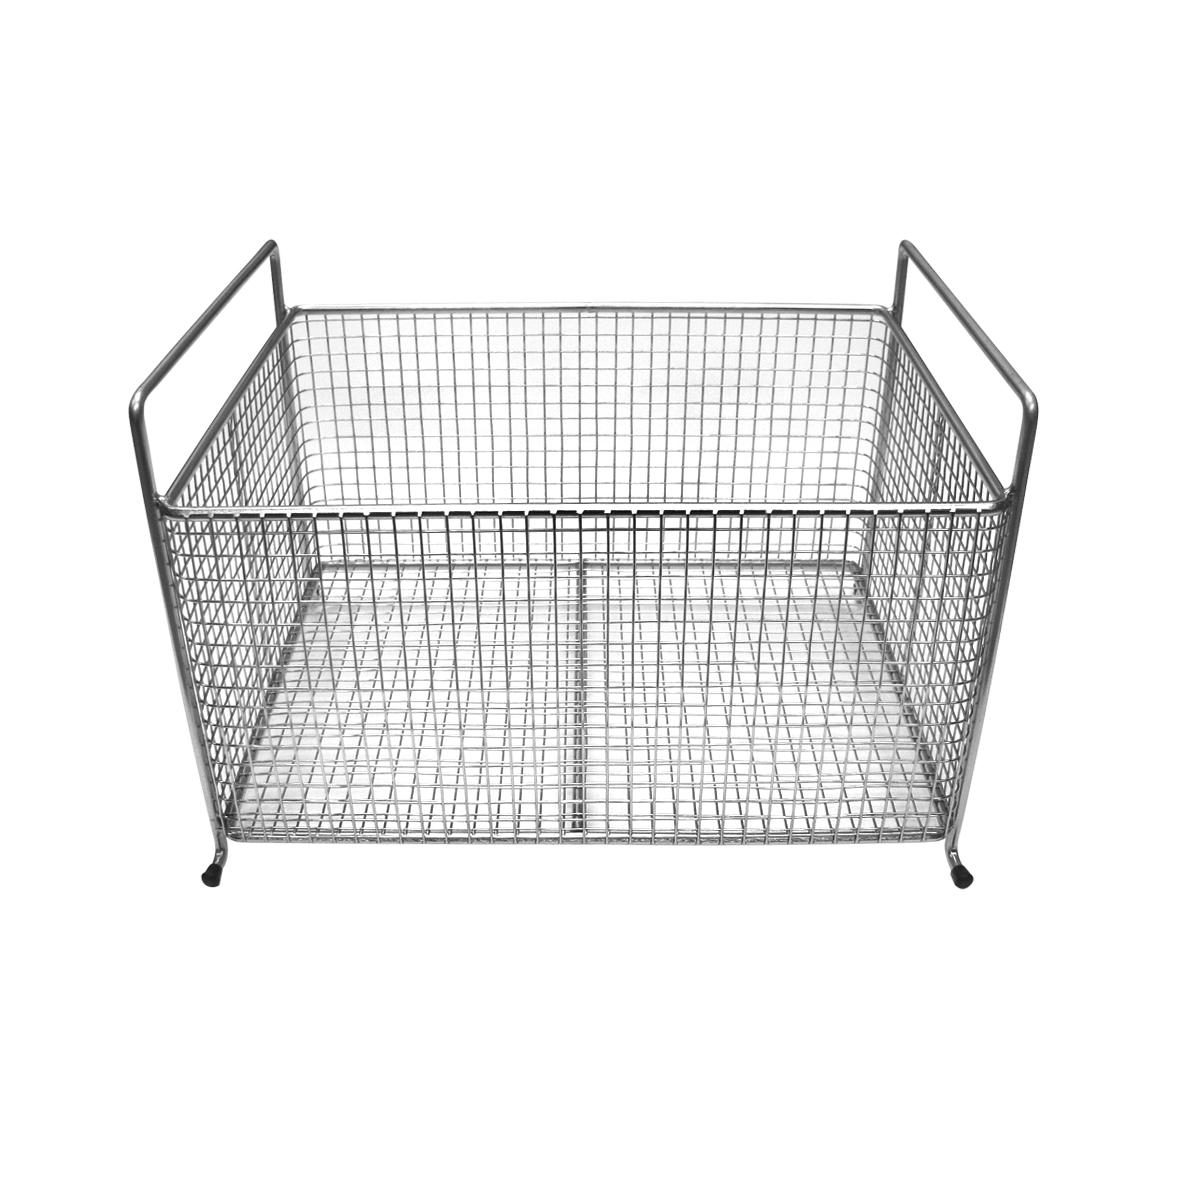 Standing basket, stainless steel, for Elma X-Tra 30